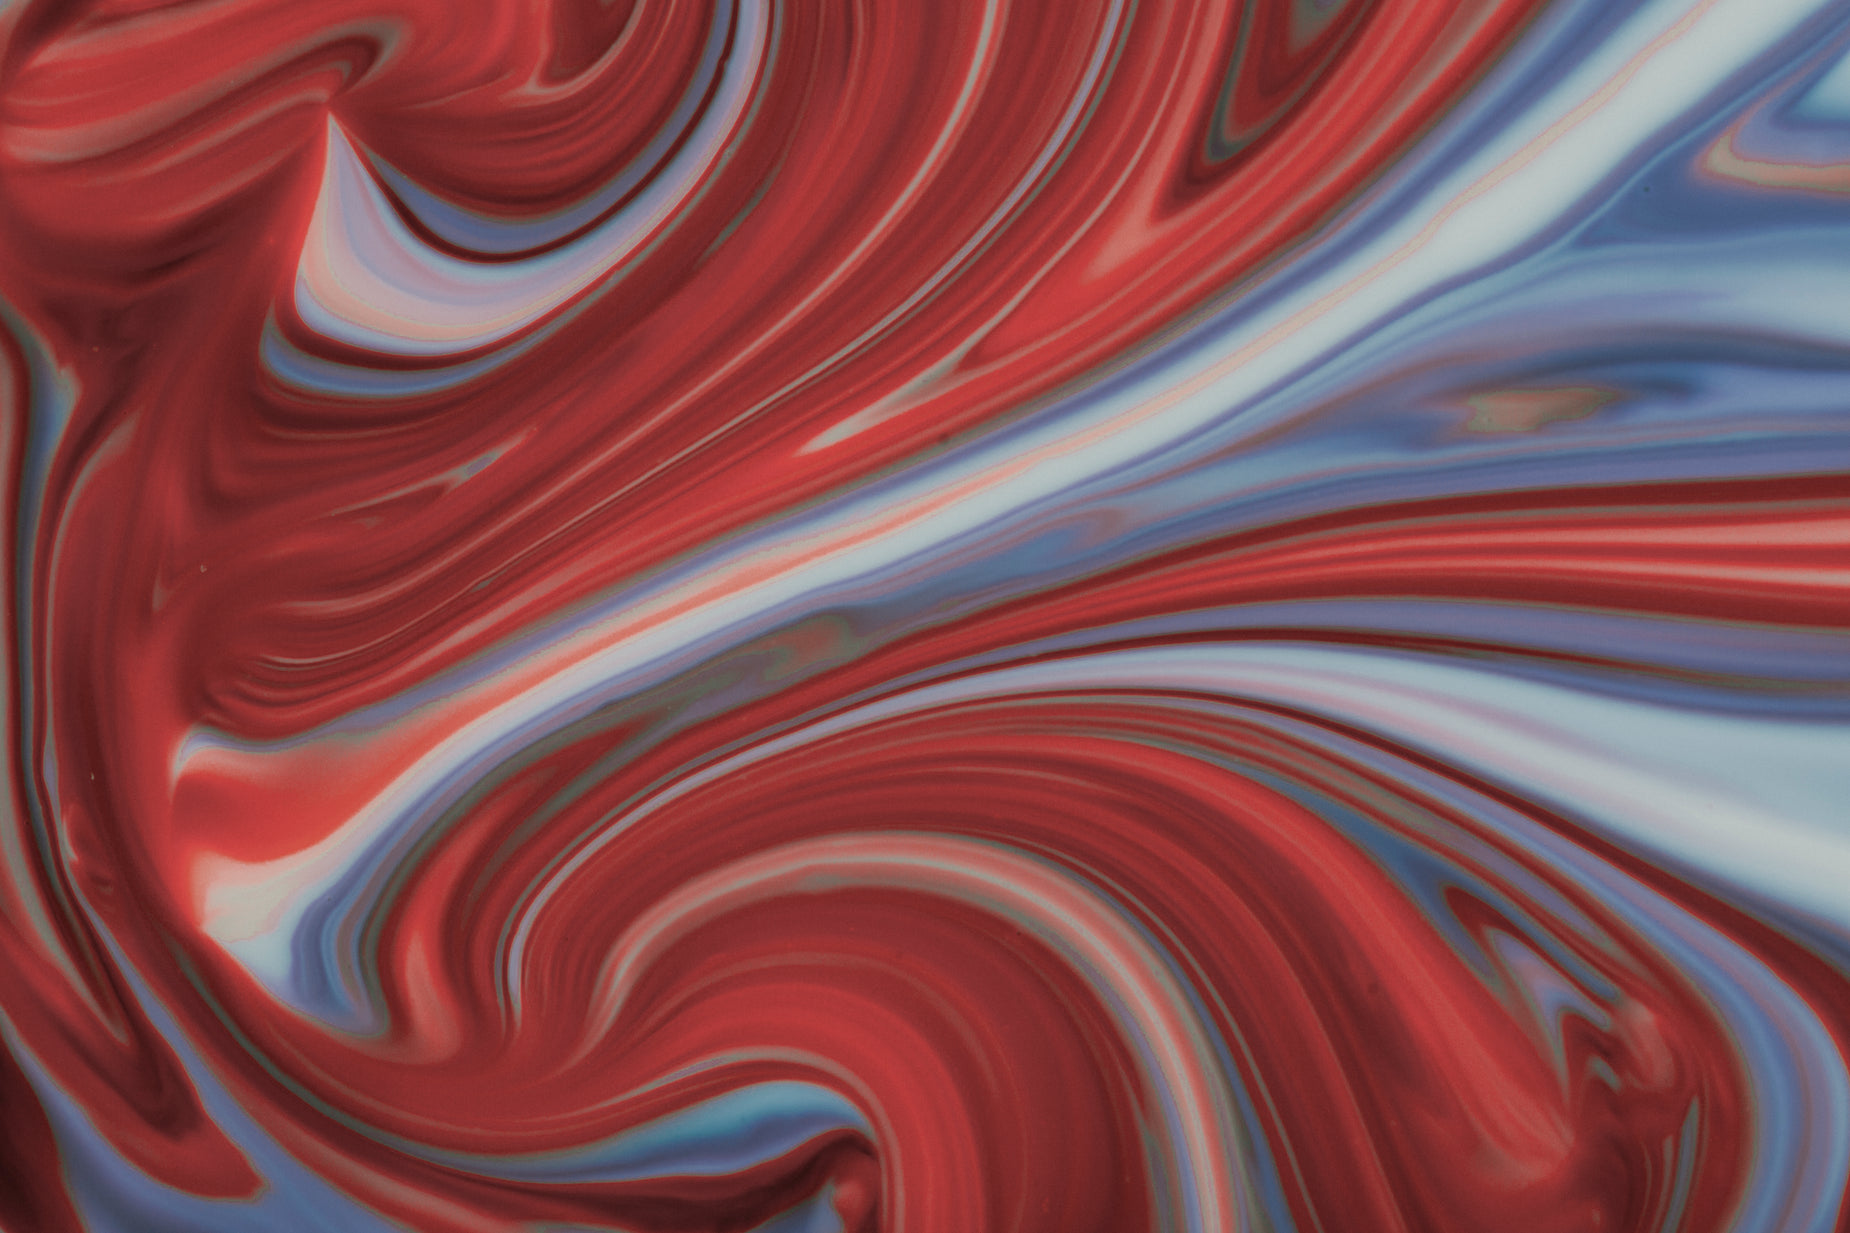 colorful fluid paint mixing over red and blue material